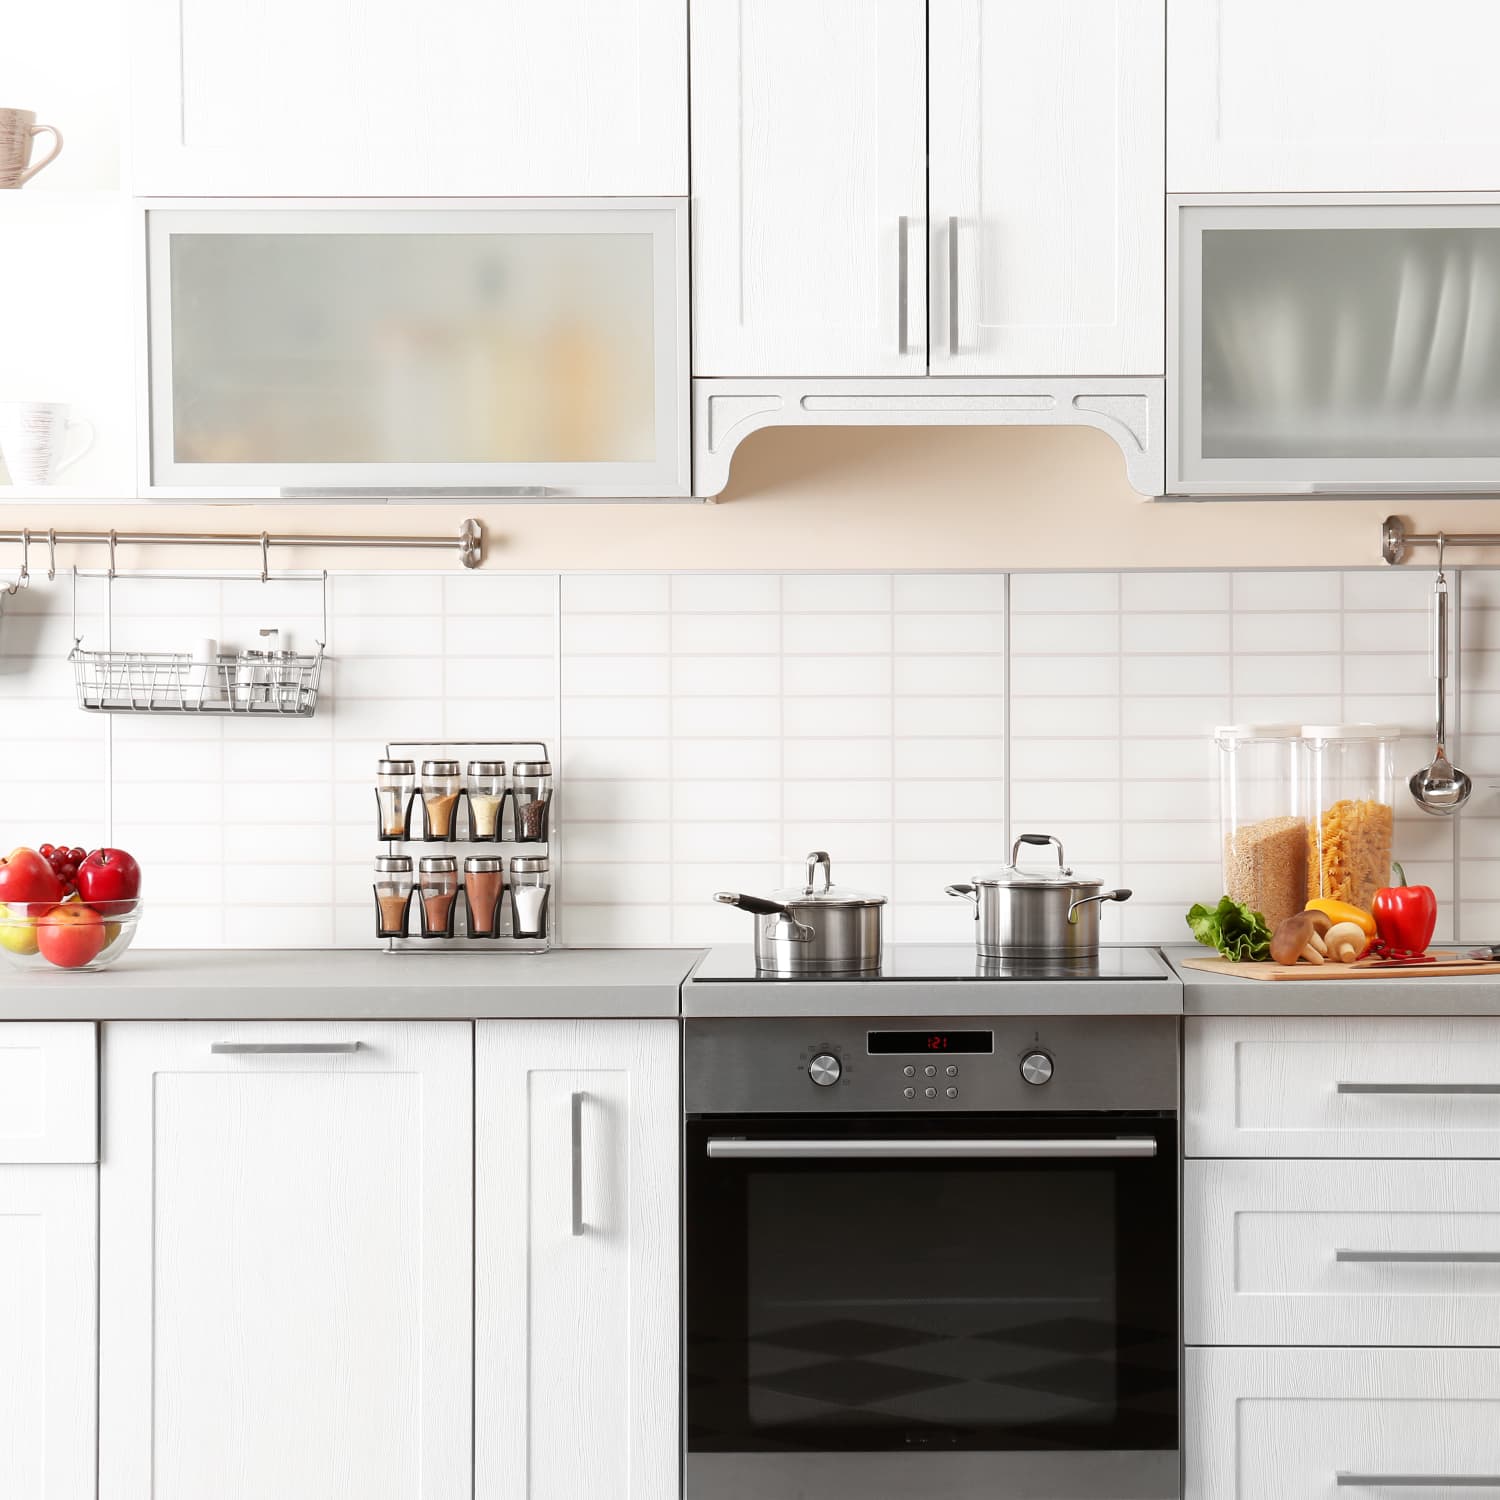 White Kitchens Are Out for 18, According to These Home Pros ...